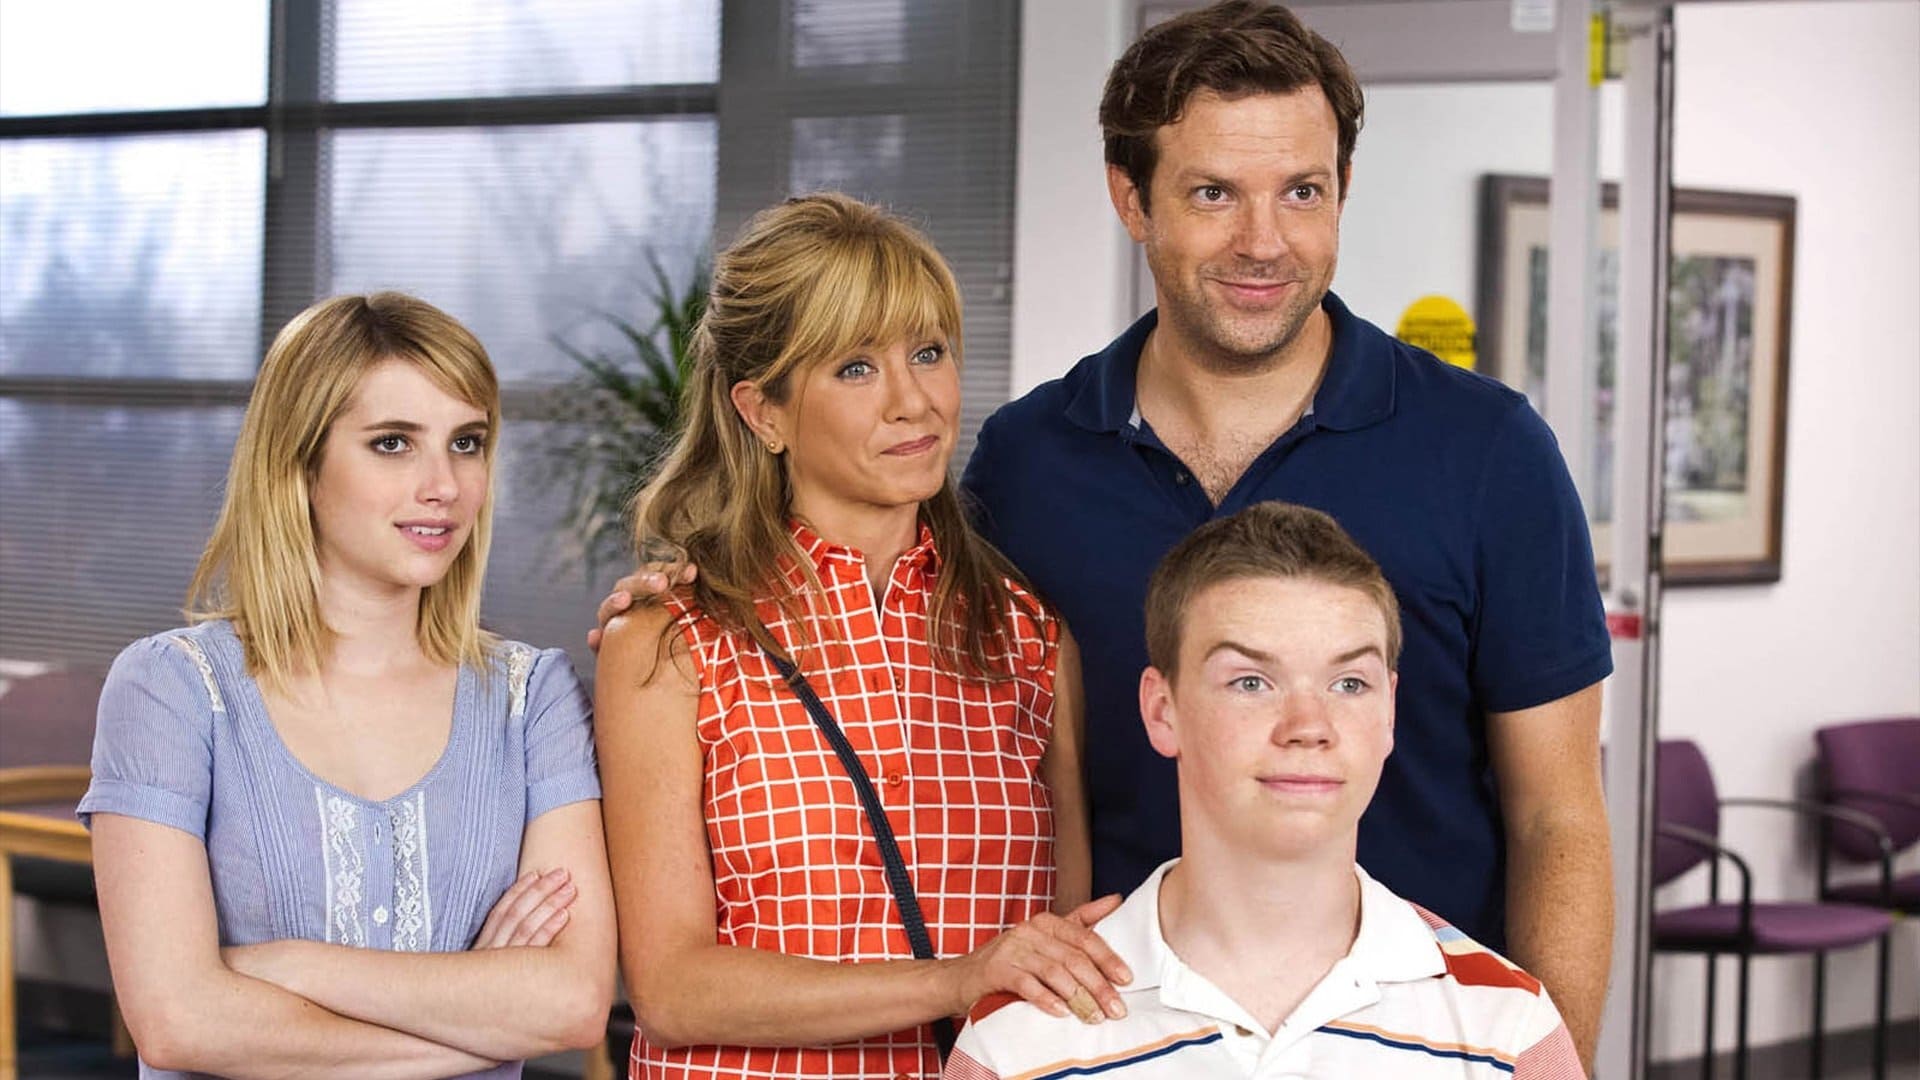 We’re the Millers 2013 123movies